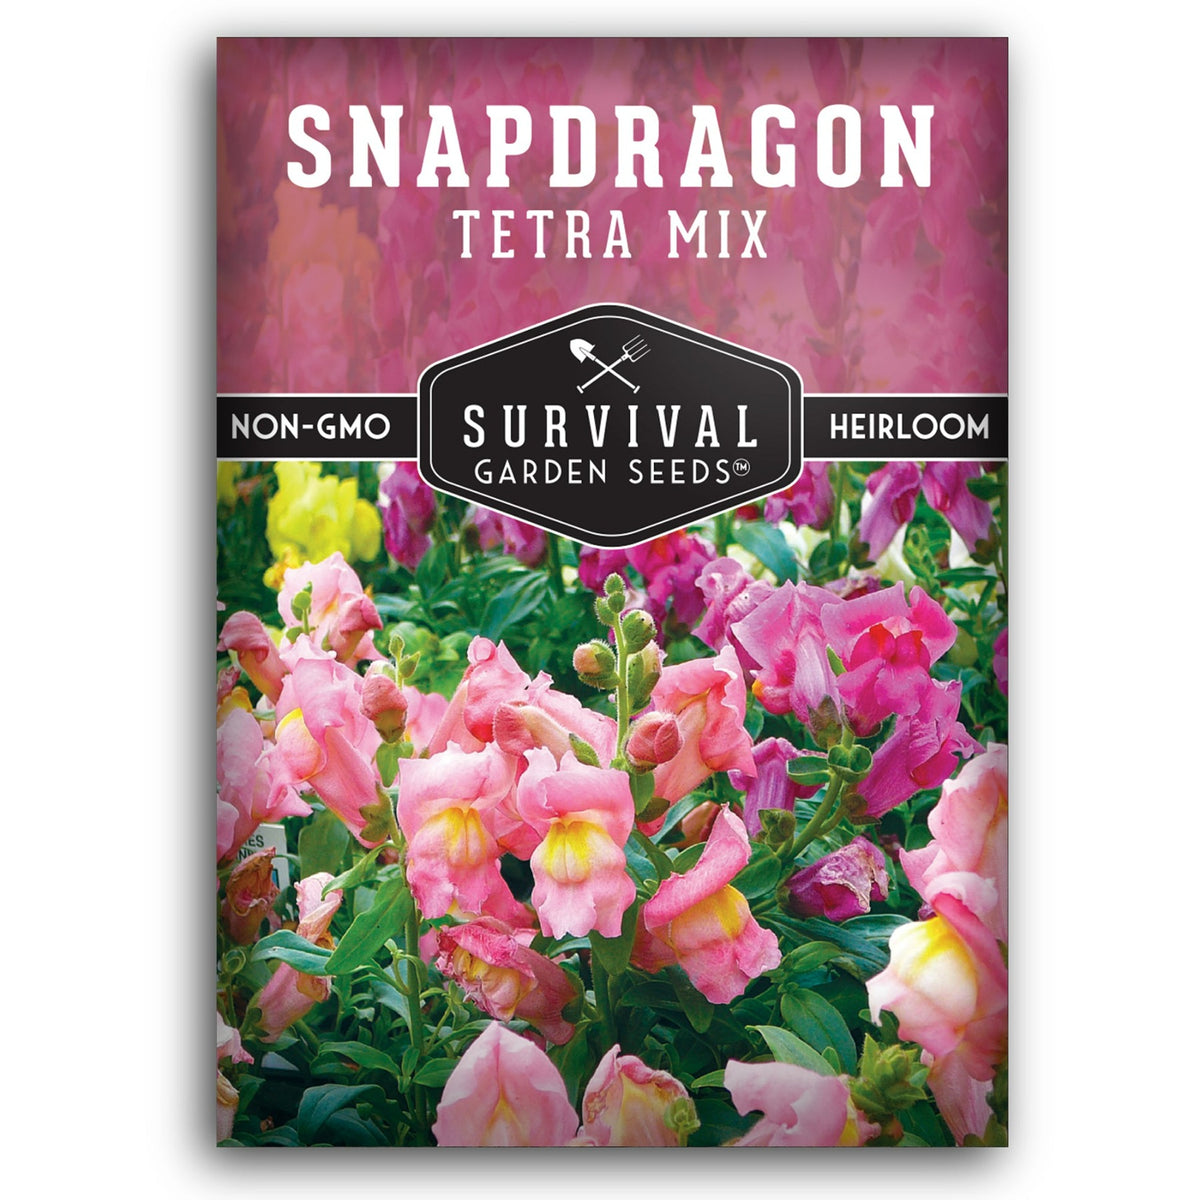 Tetra Mix Snapdragon seeds for planting